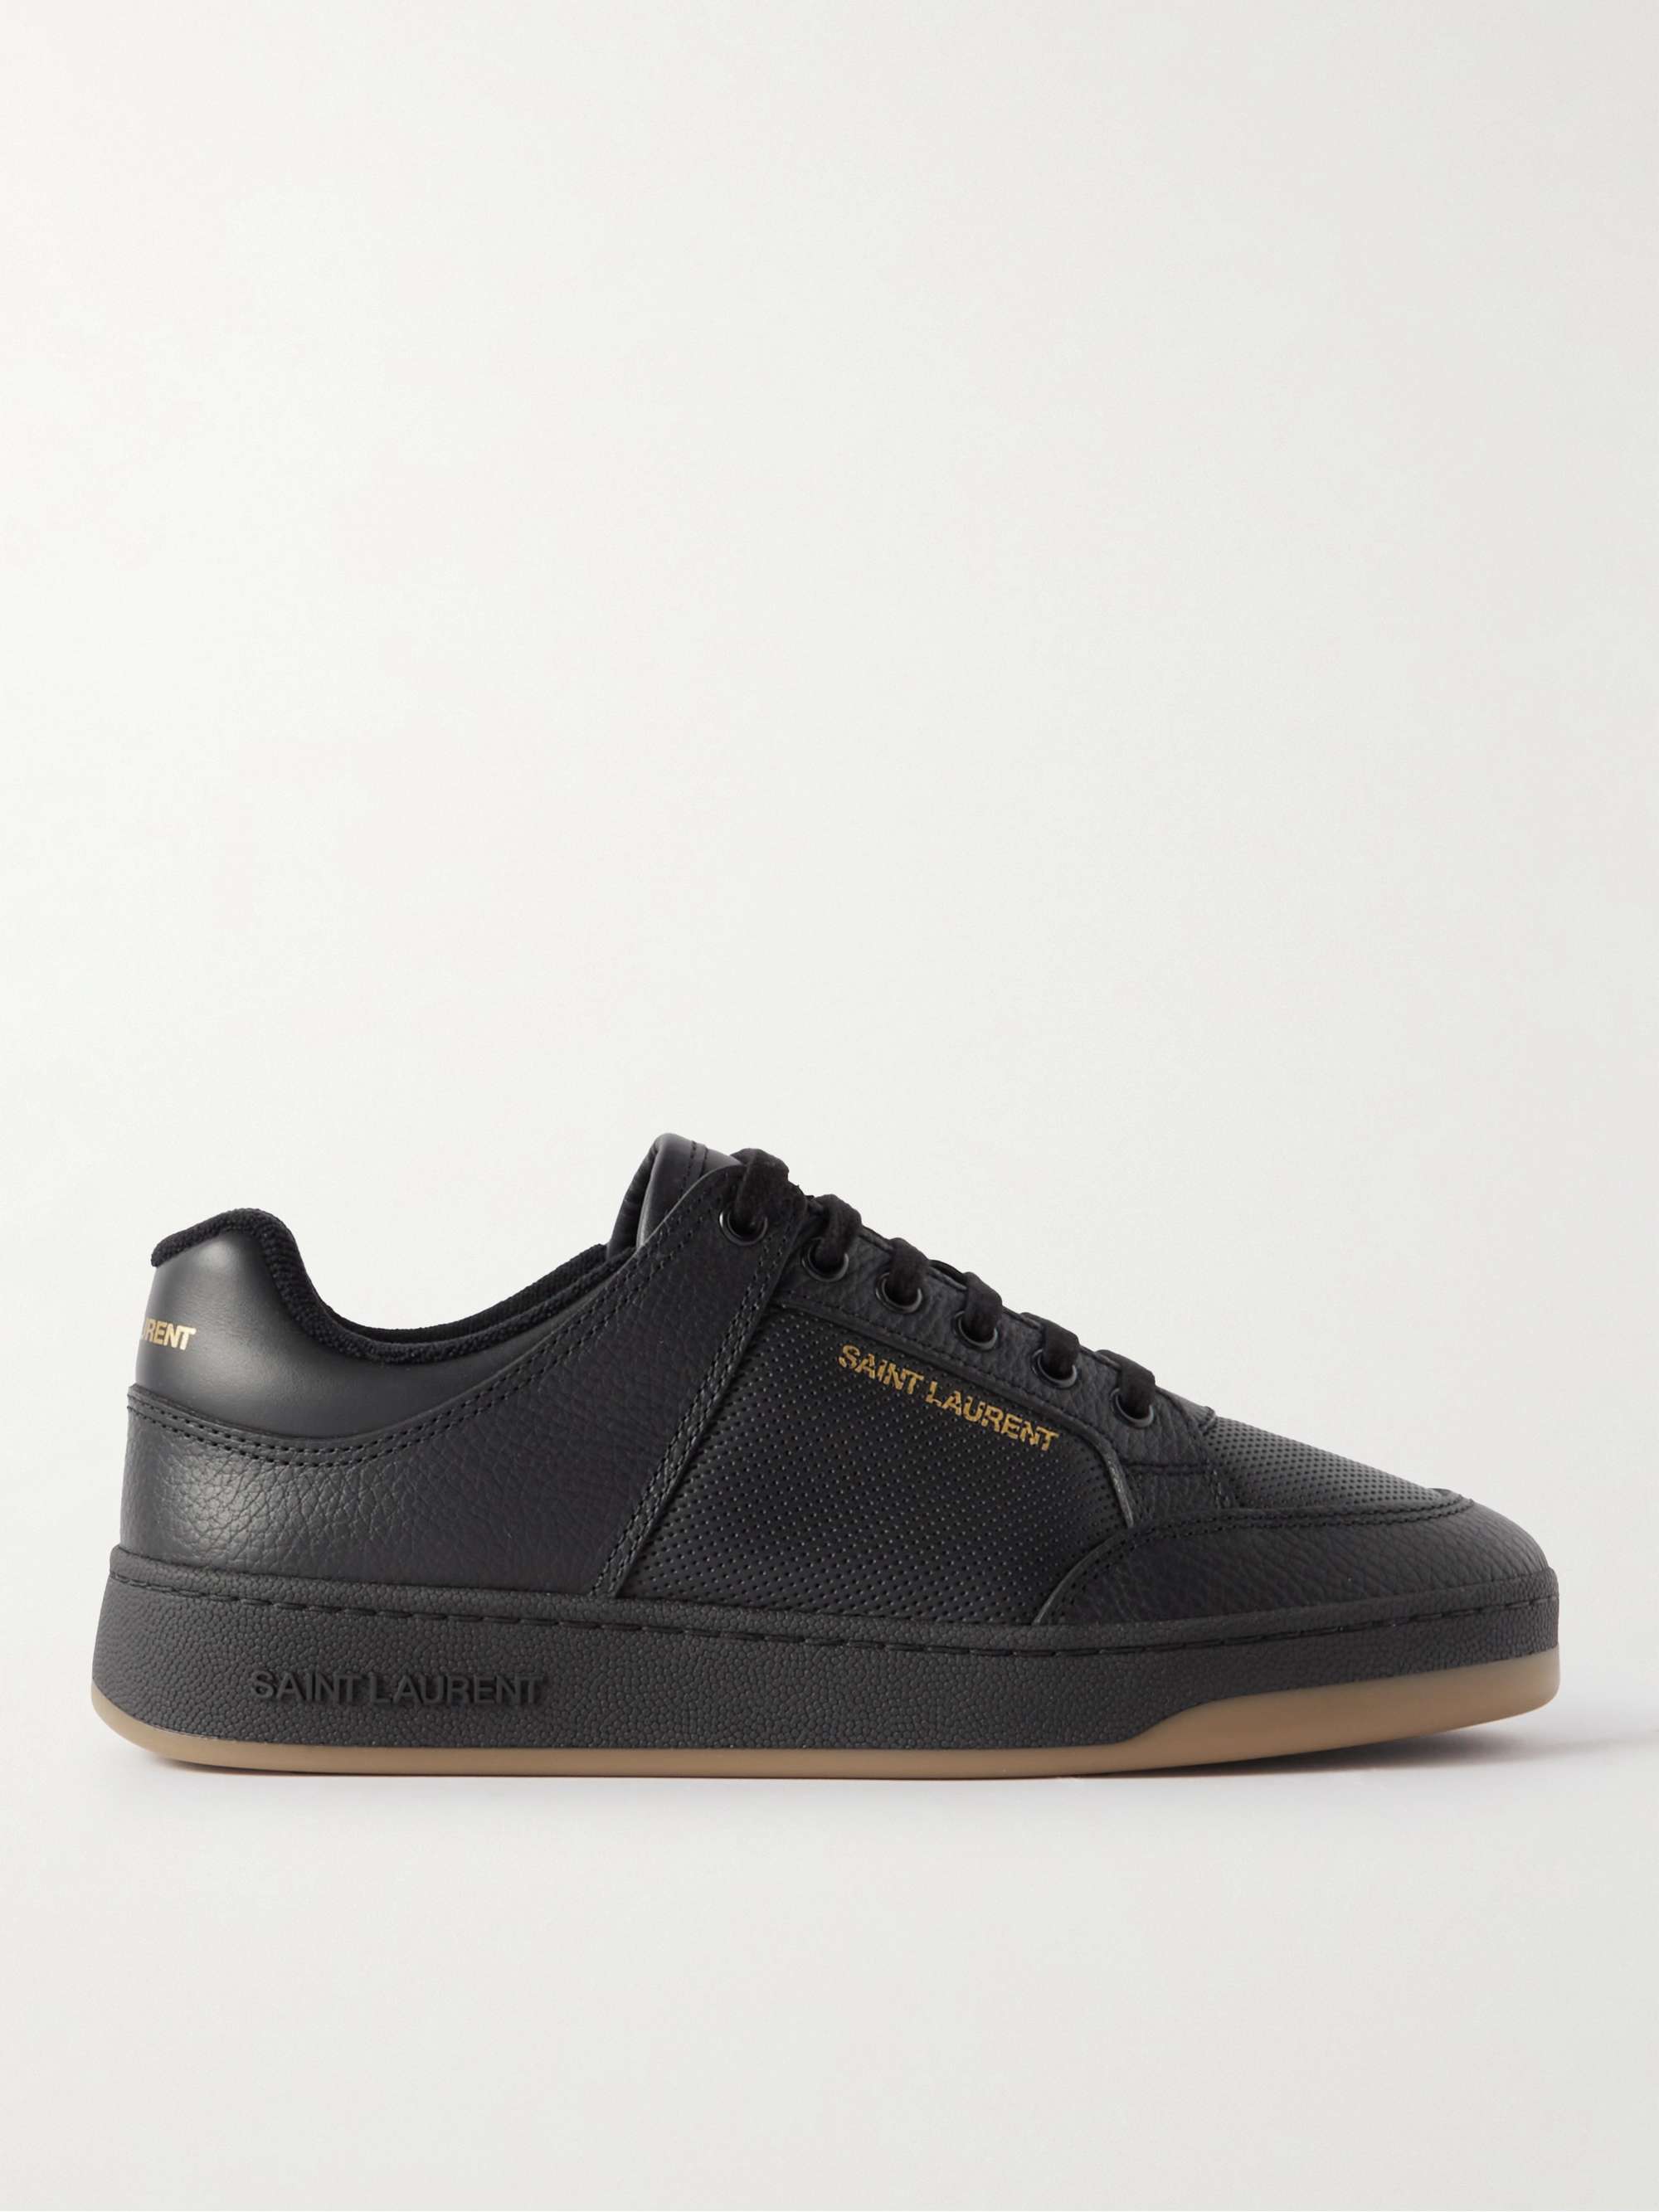 SAINT LAURENT SL/61 Perforated Leather Sneakers